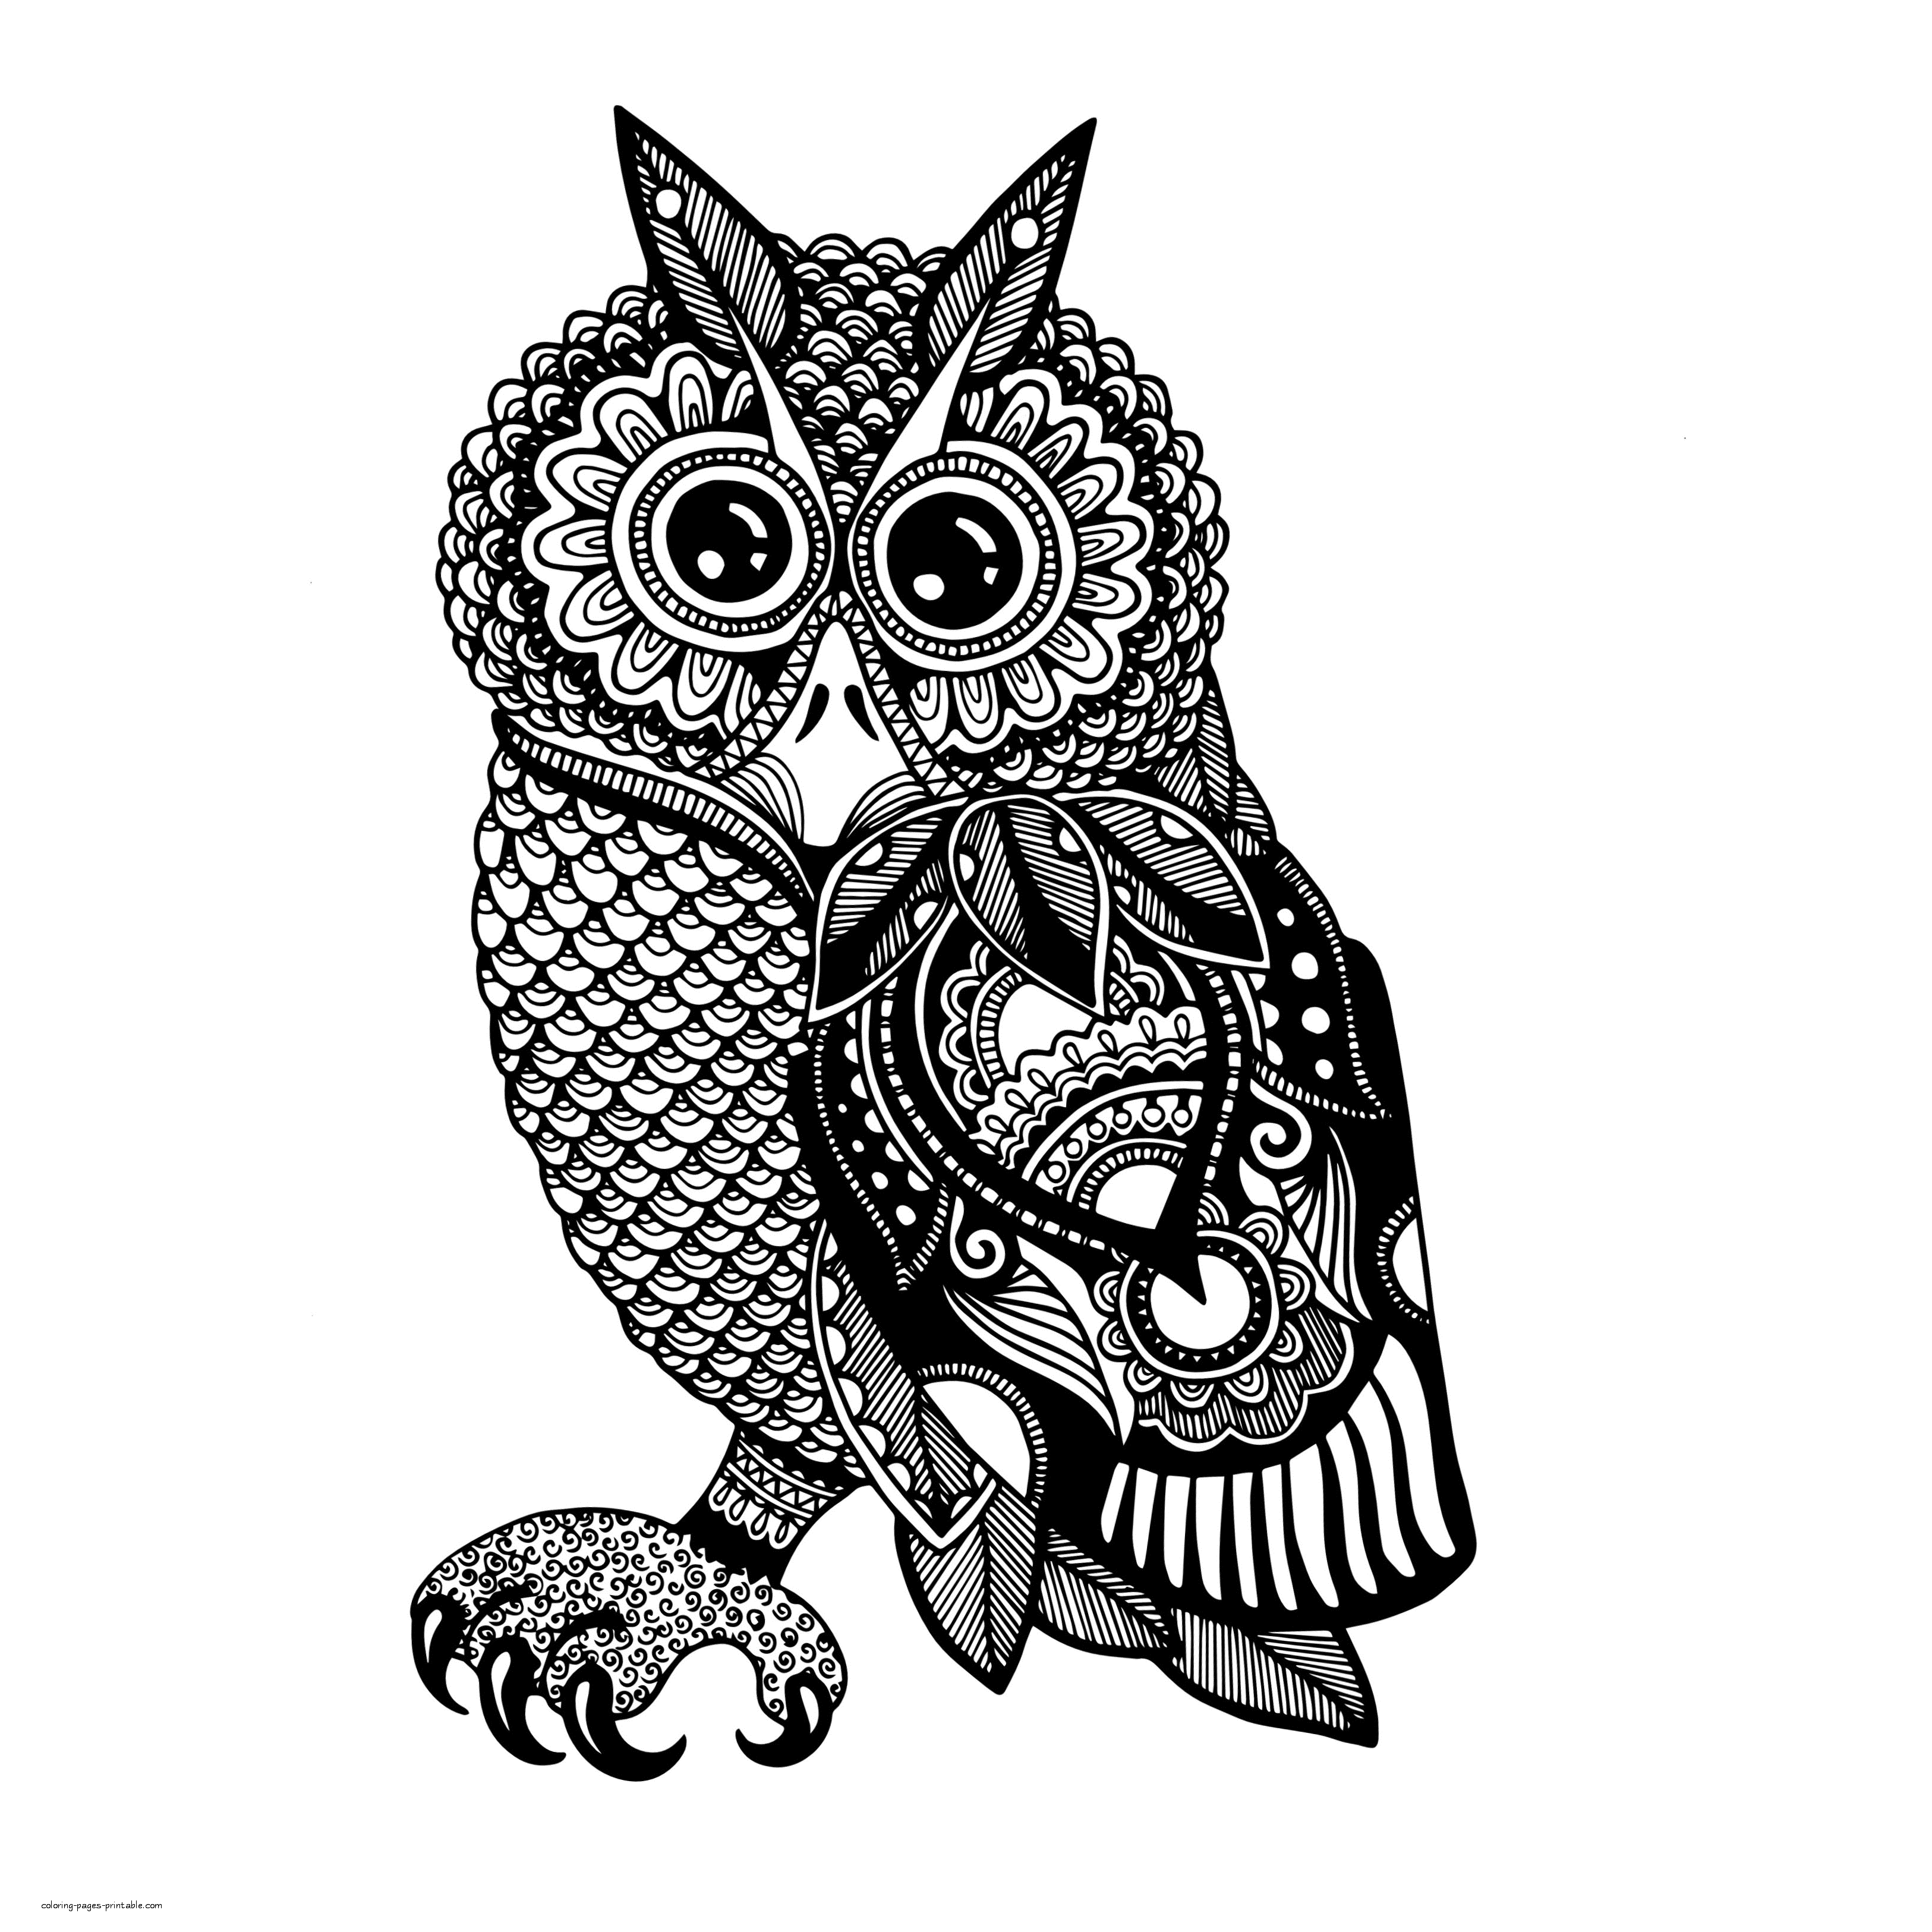 Adult Bird Coloring Pages. An Owl